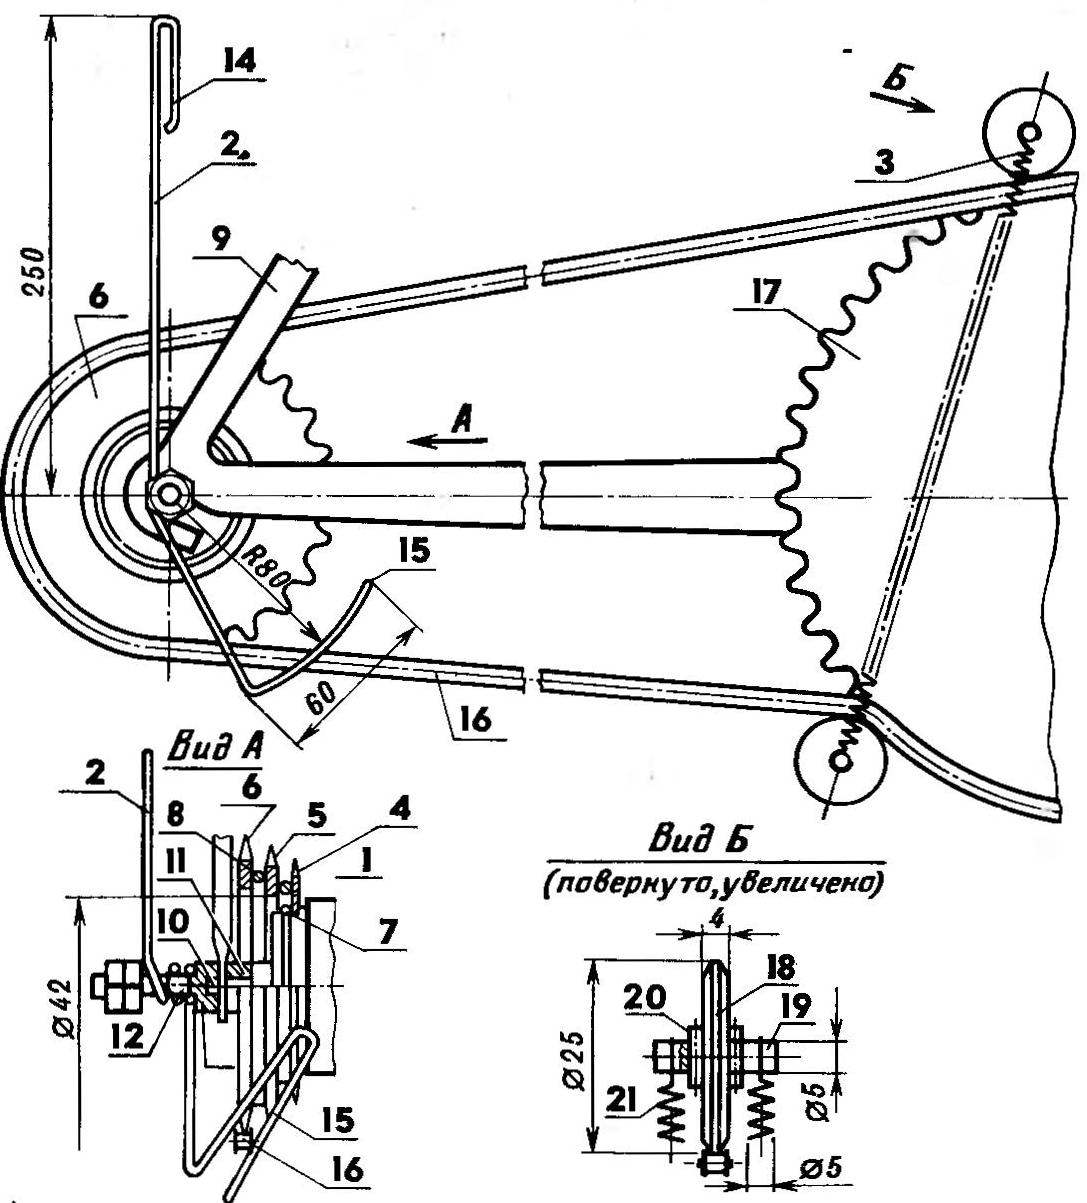 R and p. 3. The mechanism of change of gear ratio for road bike